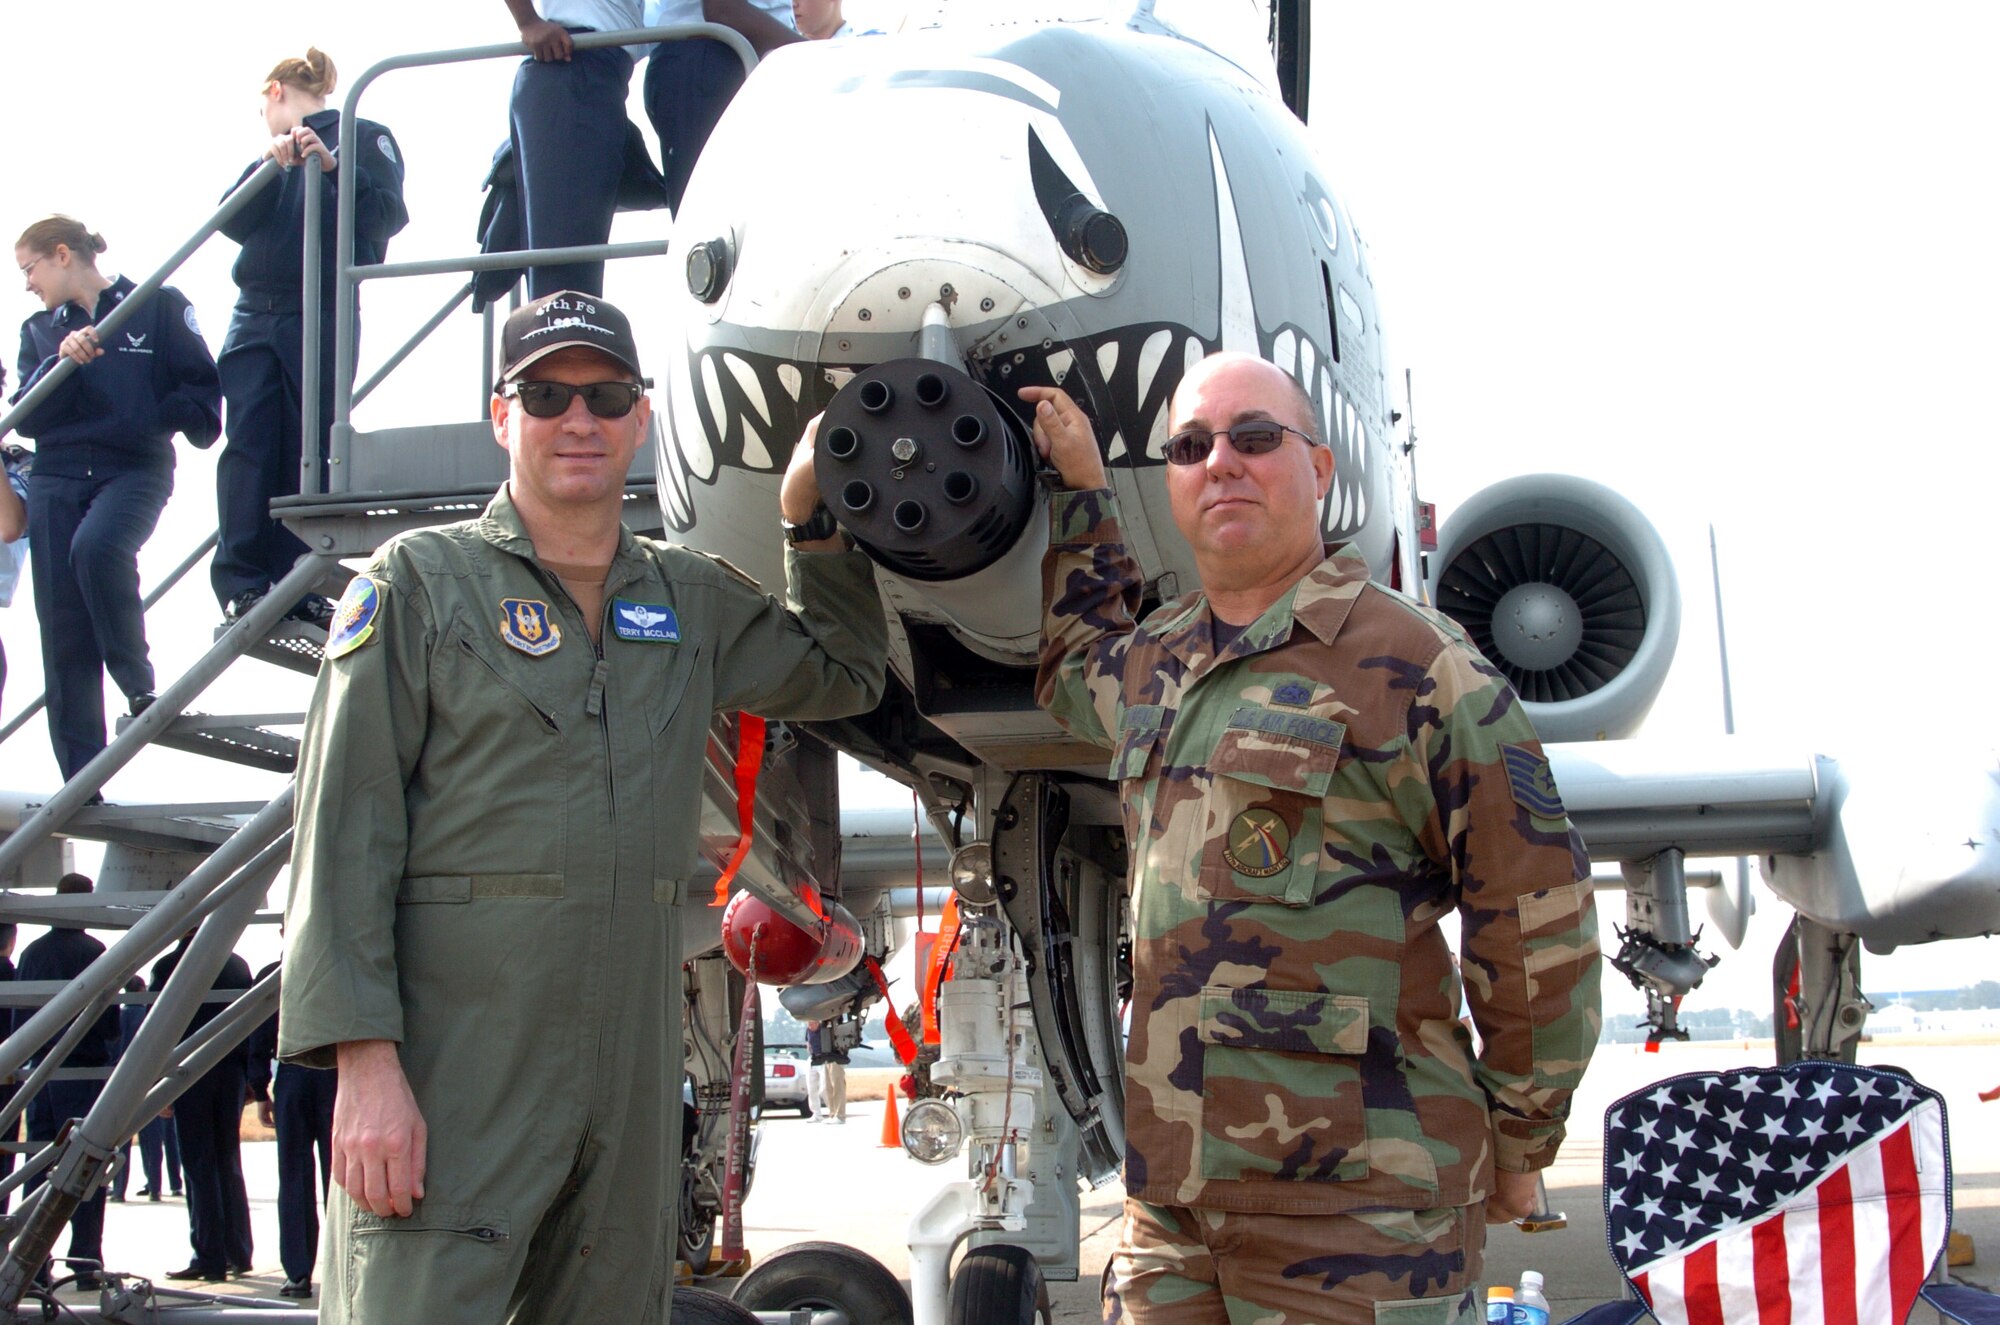 Maj. Terry W. McClain, 47th Fighter Squadron A-10 pilot and Tech. Sgt. Edward Fairchild, 717th Aircraft Maintenance Squadron crew chief, both air reserve technicians, stand proudly in front of their A-10 "Warthog" from Barksdale AFB, La.  Both Airmen were part of the Junior Reserve Officer Training Week at Dobbins ARB were more than 3,000 JROTC and Civil Air Patrol cadets were treated to a C-130 orientation flight, aircraft displays and static displays and interacted with Airmen assigned to 94th Security Forces Squadron, 94th Aeromedical Evacuation Squadron, and 94th Aerial Delivery Port Flight. (Photo by Master Sgt. Stan Coleman)